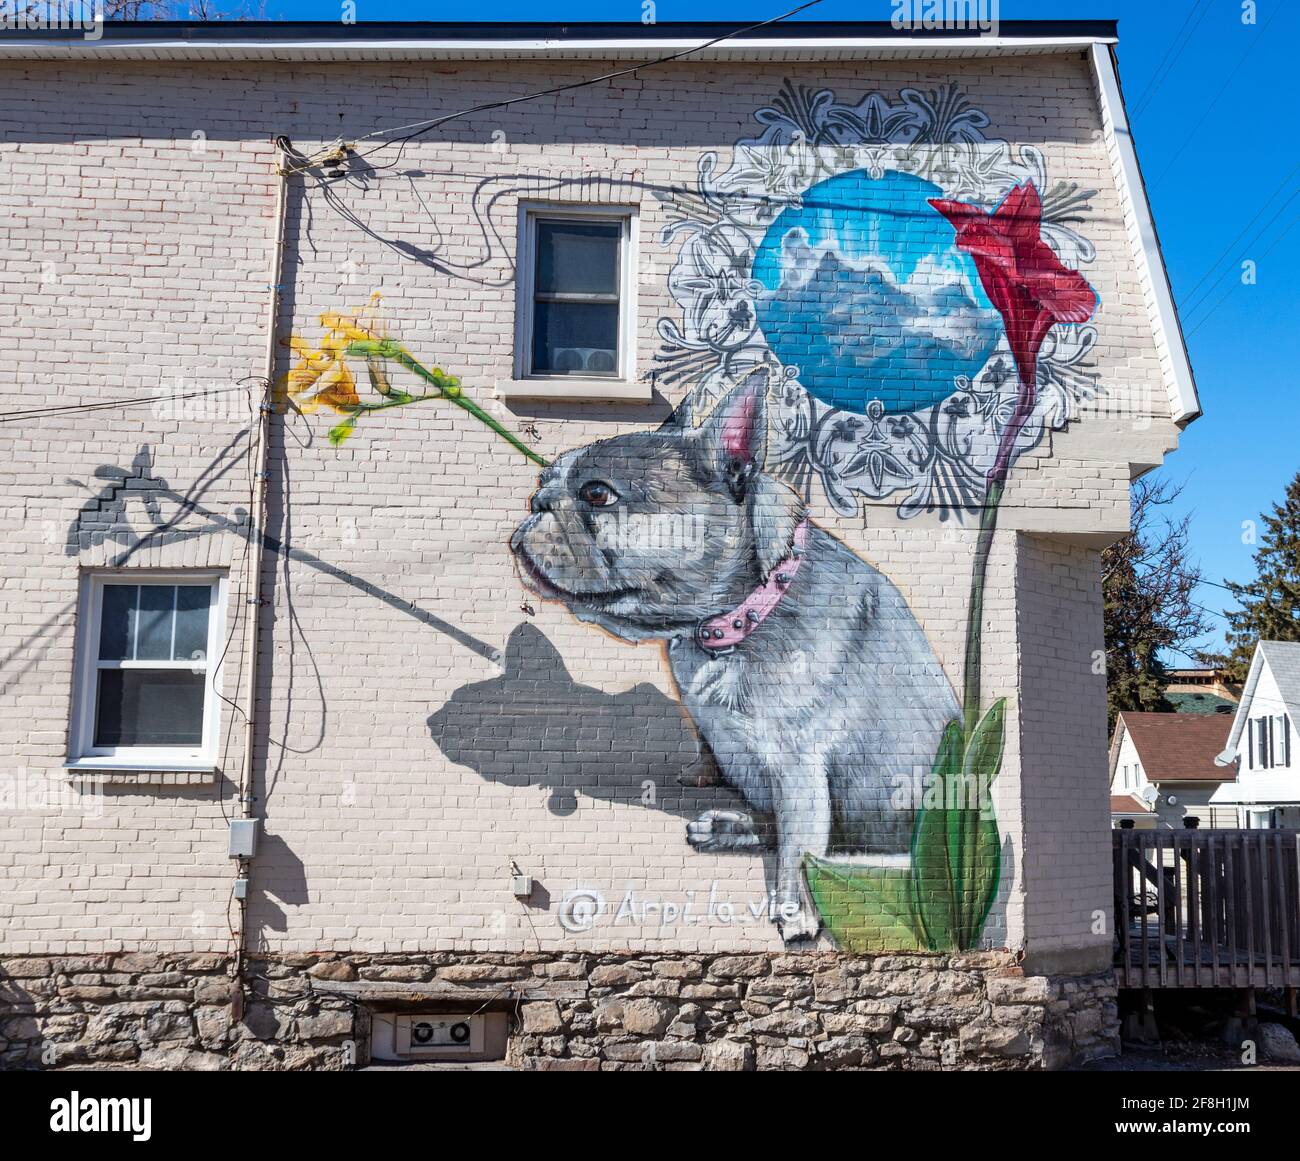 Urban house with street art featuring a gray dog with a pink collar and flowers Stock Photo